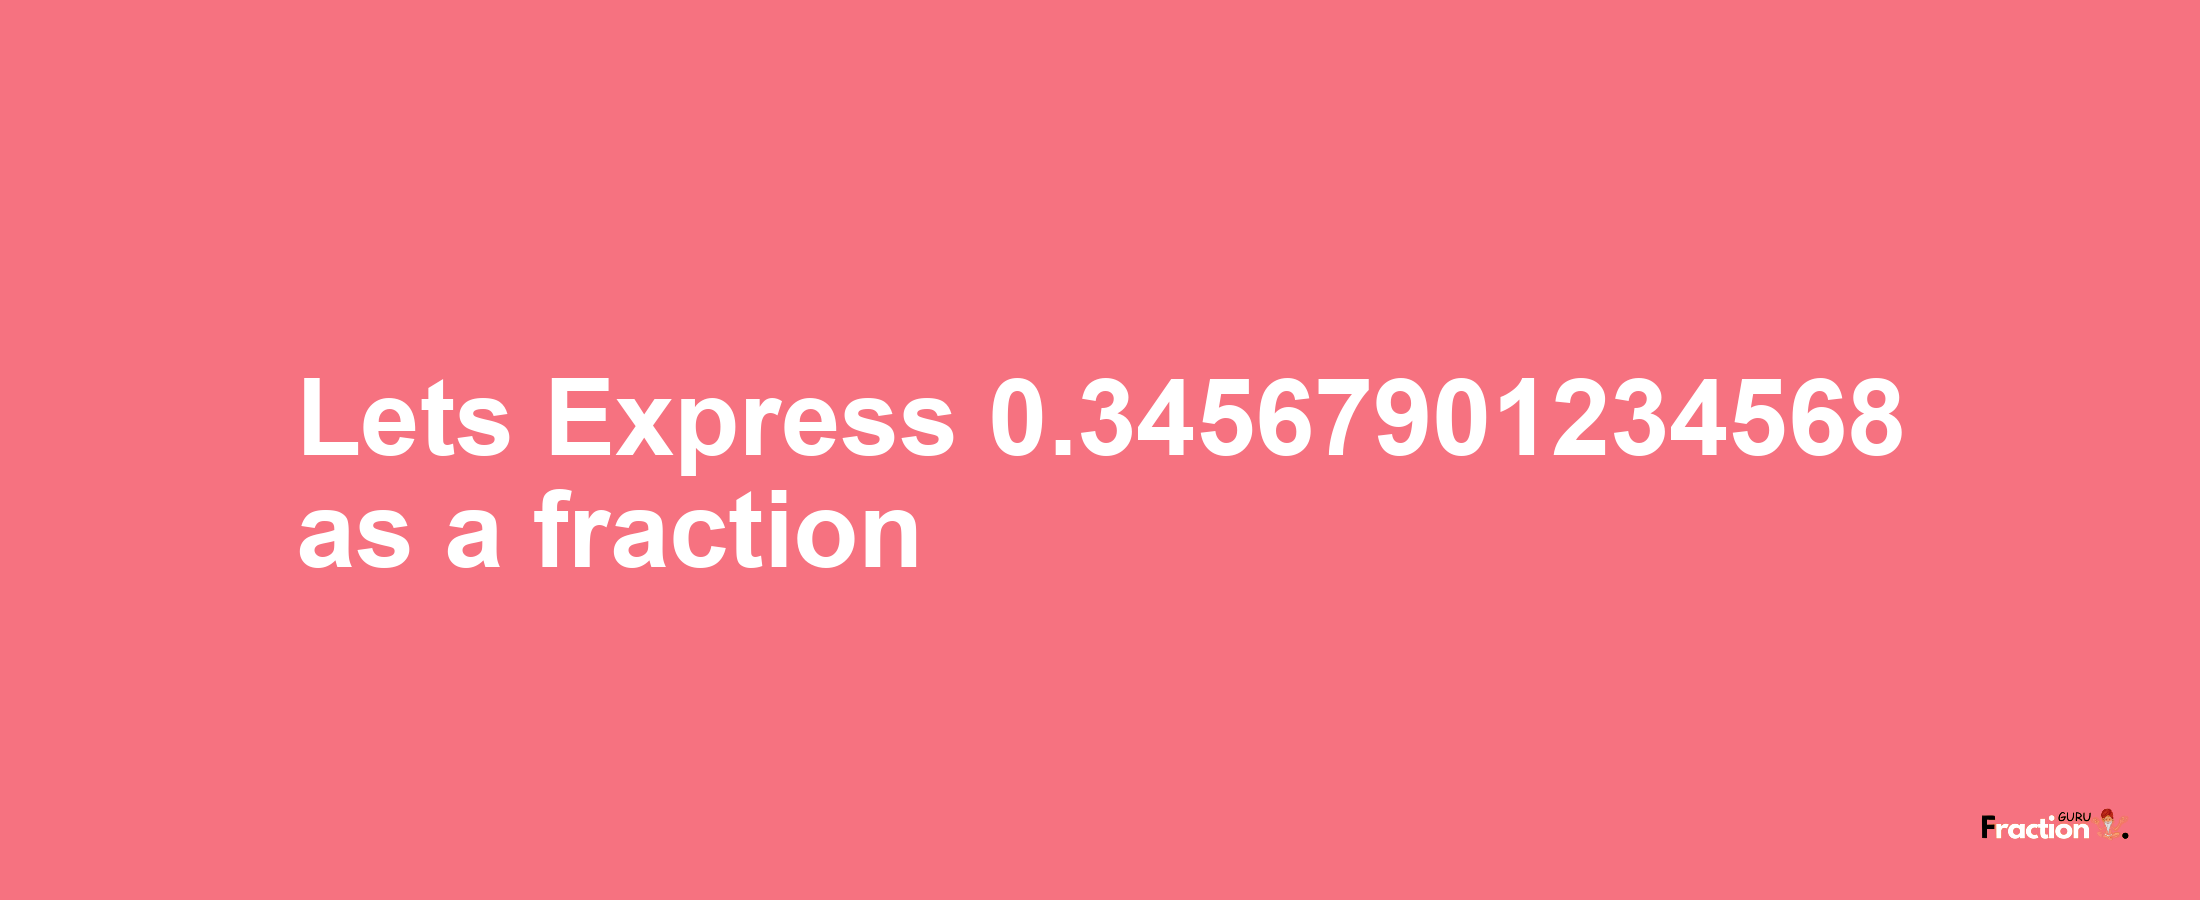 Lets Express 0.34567901234568 as afraction